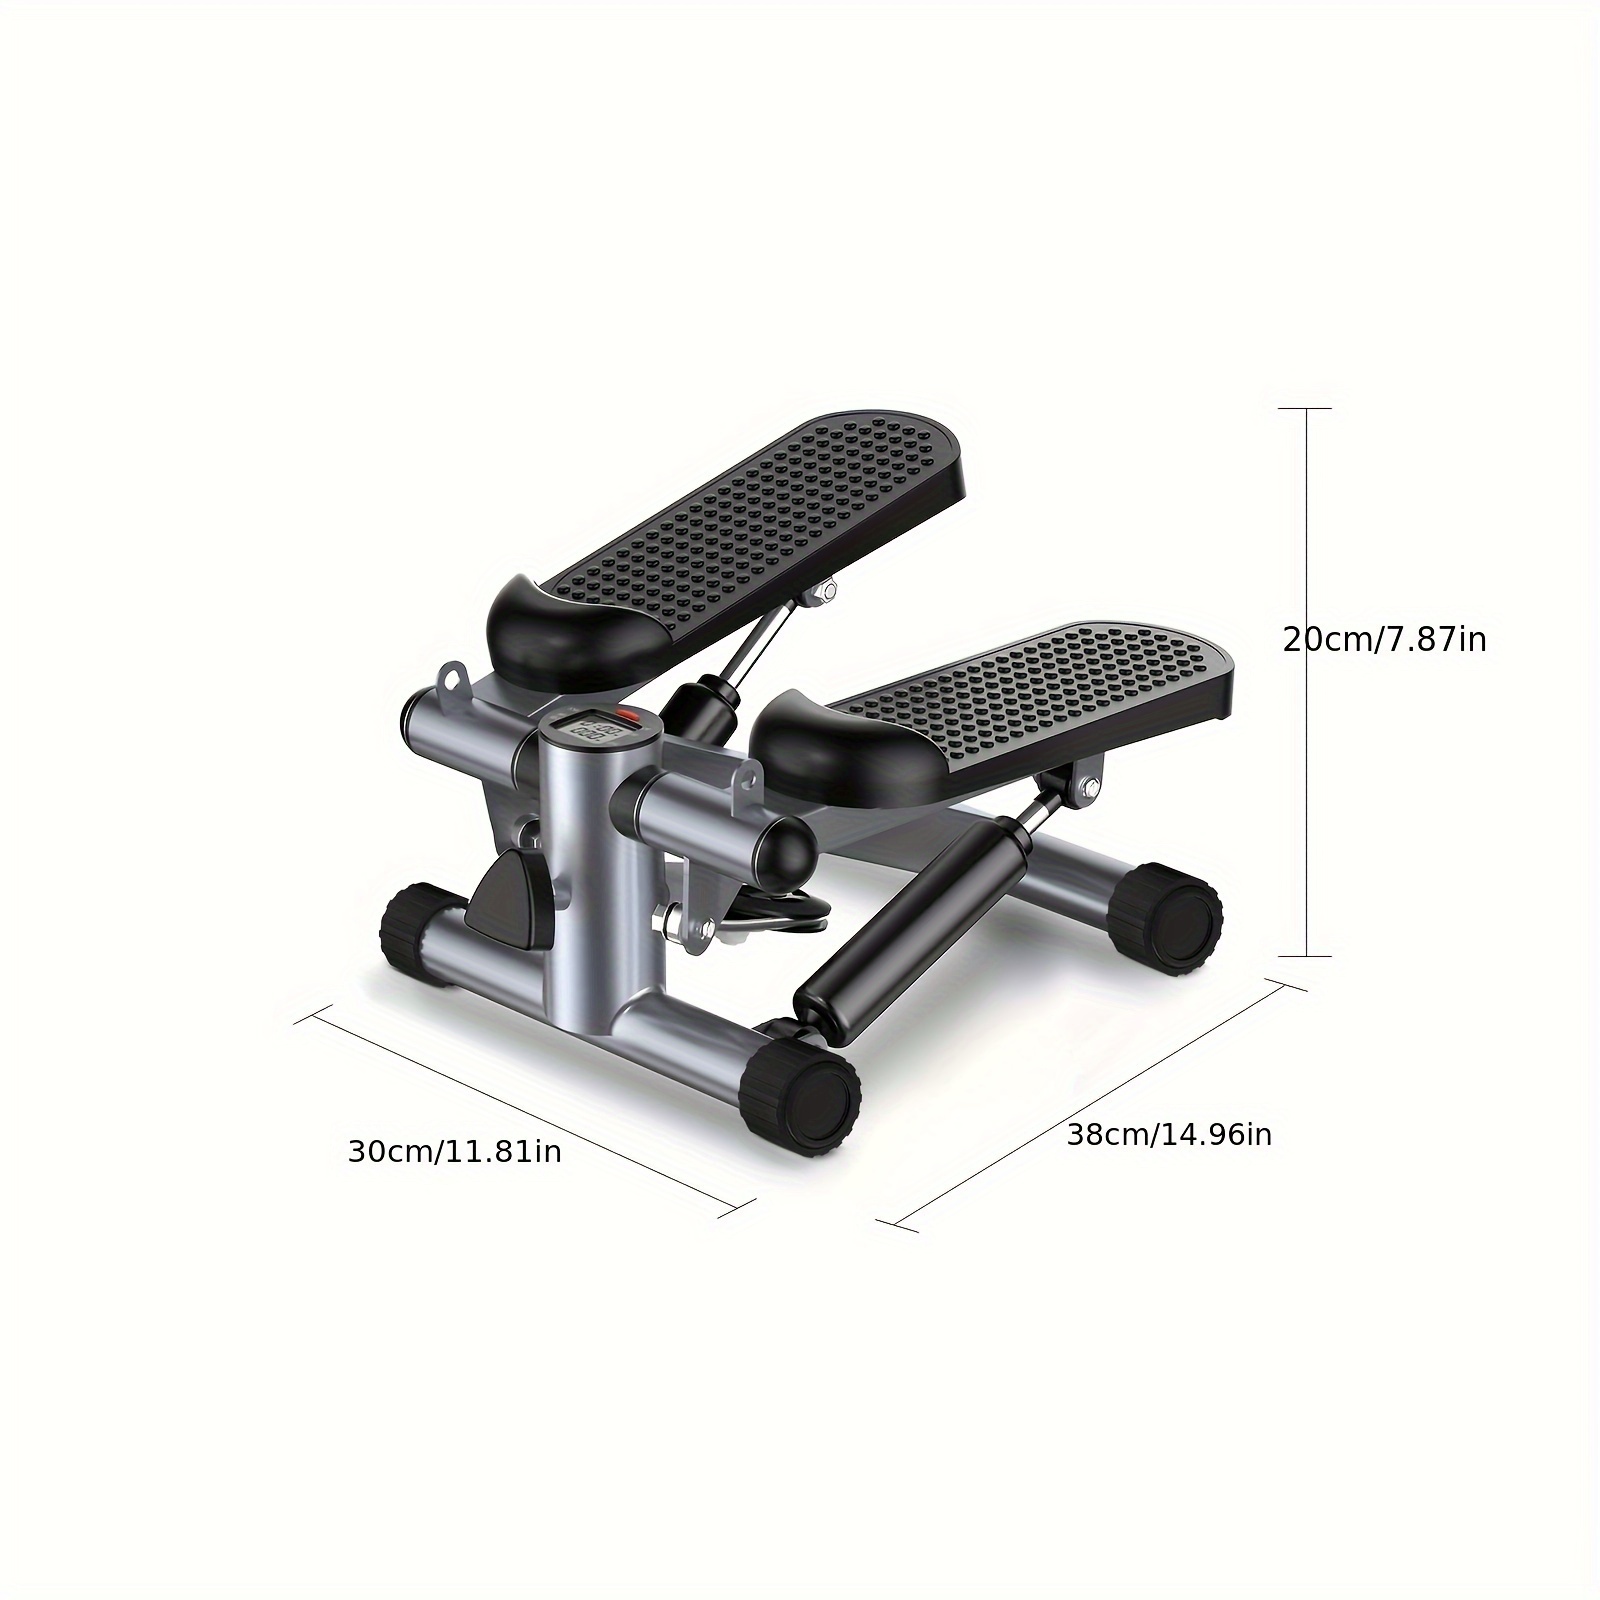 Stepper For Exercise,Mini Stepper With Exercise Equipment For Home  Workouts,Hydraulic Fitness Stair Stepper With Resistance Band & Calories  Count 350l